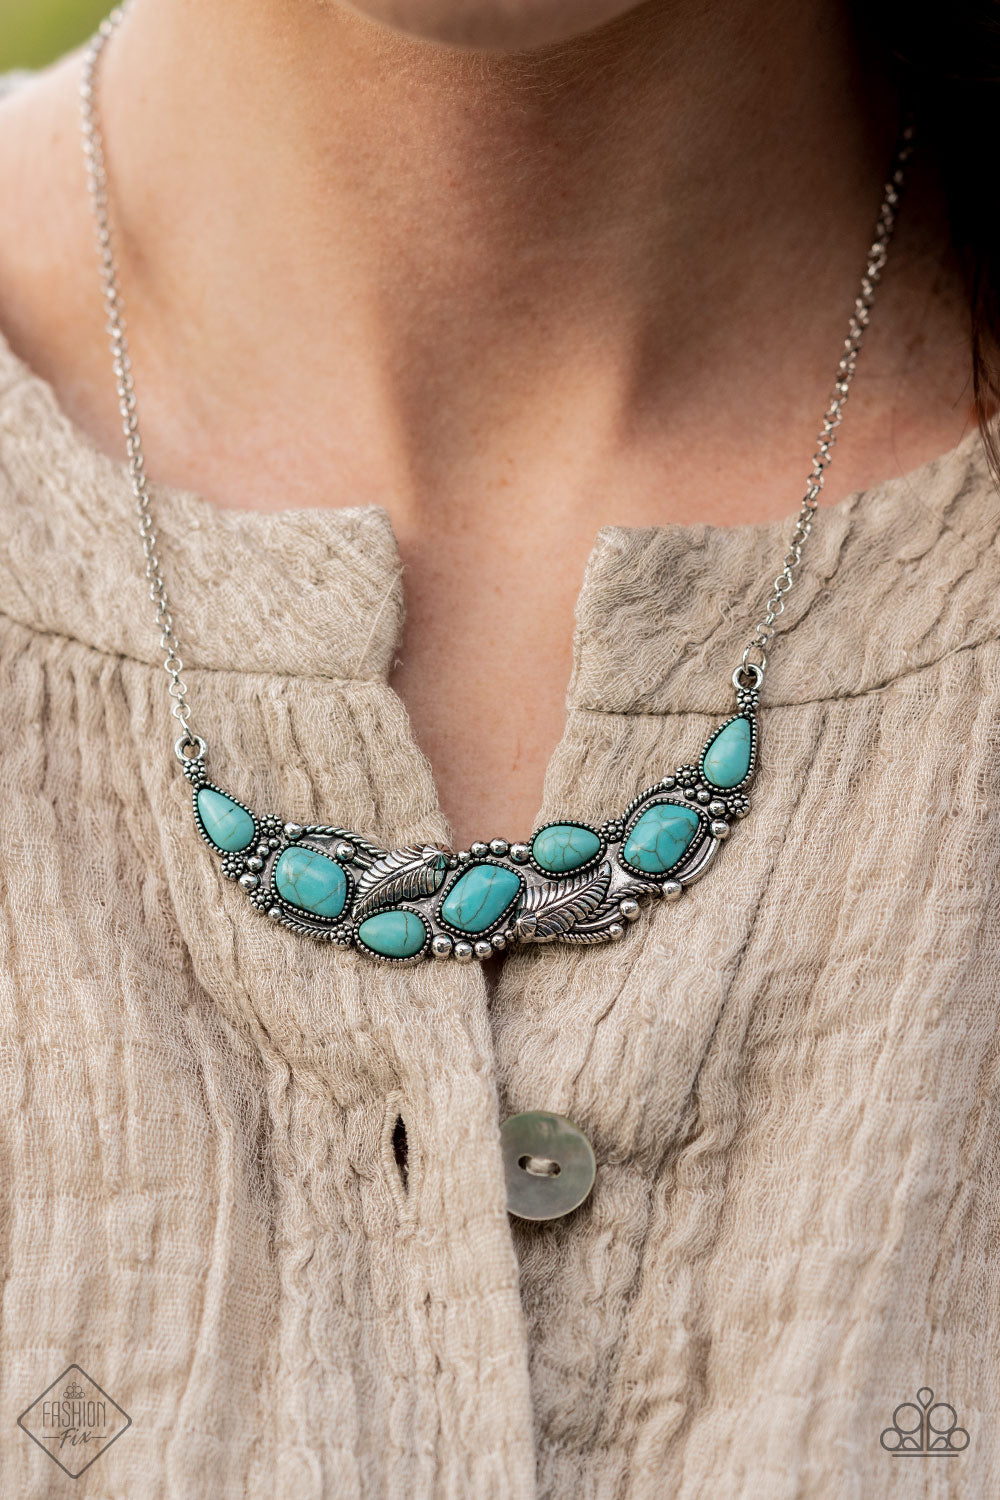 Simply Santa Fe - 4 Piece Trend Blend Set - July 2021 - Turquoise and Silver Fashion Fix Set - Paparazzi Accessories - Includes one of each accessory featured in the Fashion Fix: Necklace, Earrings, Bracelet, Ring.